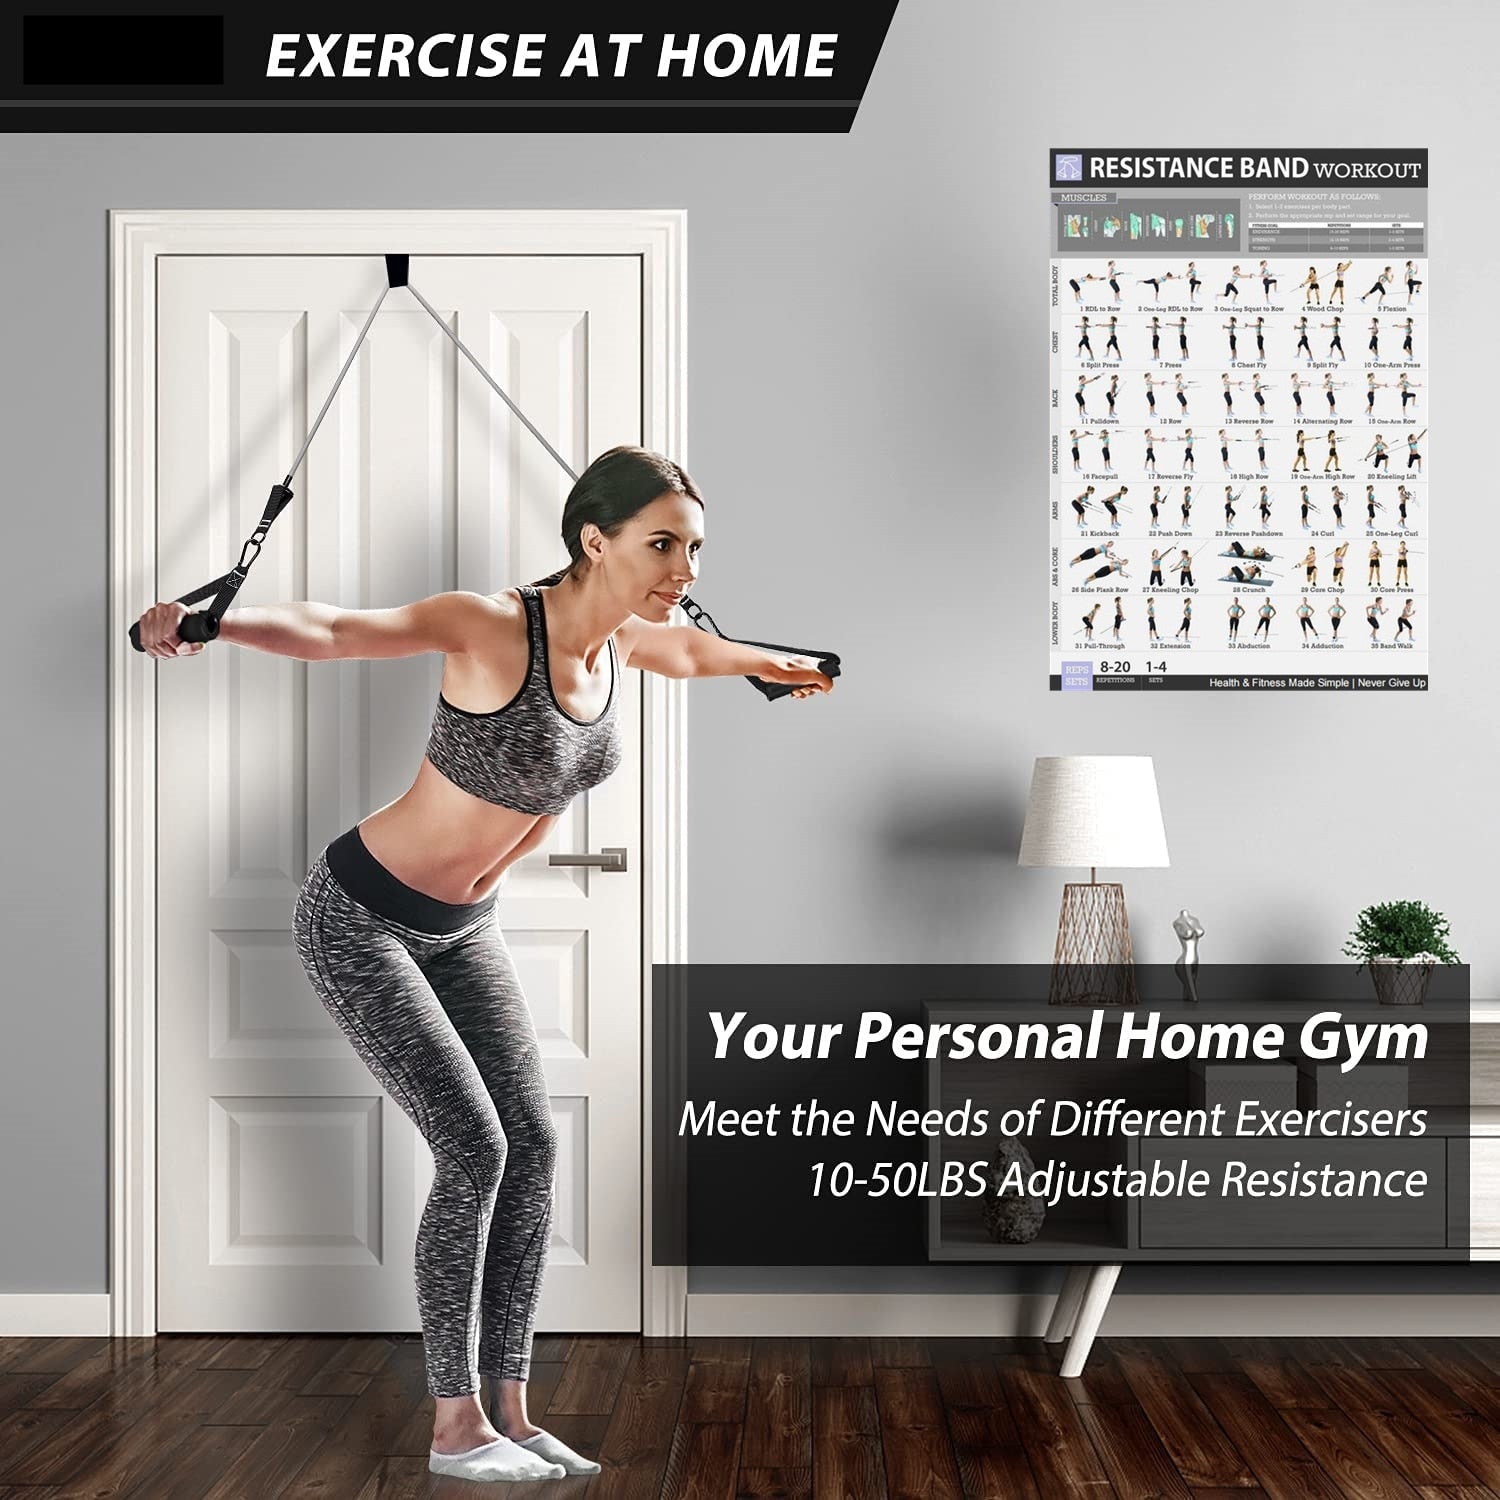 Training Resistance Bands Exercise at Home - Thefitnesshut.com